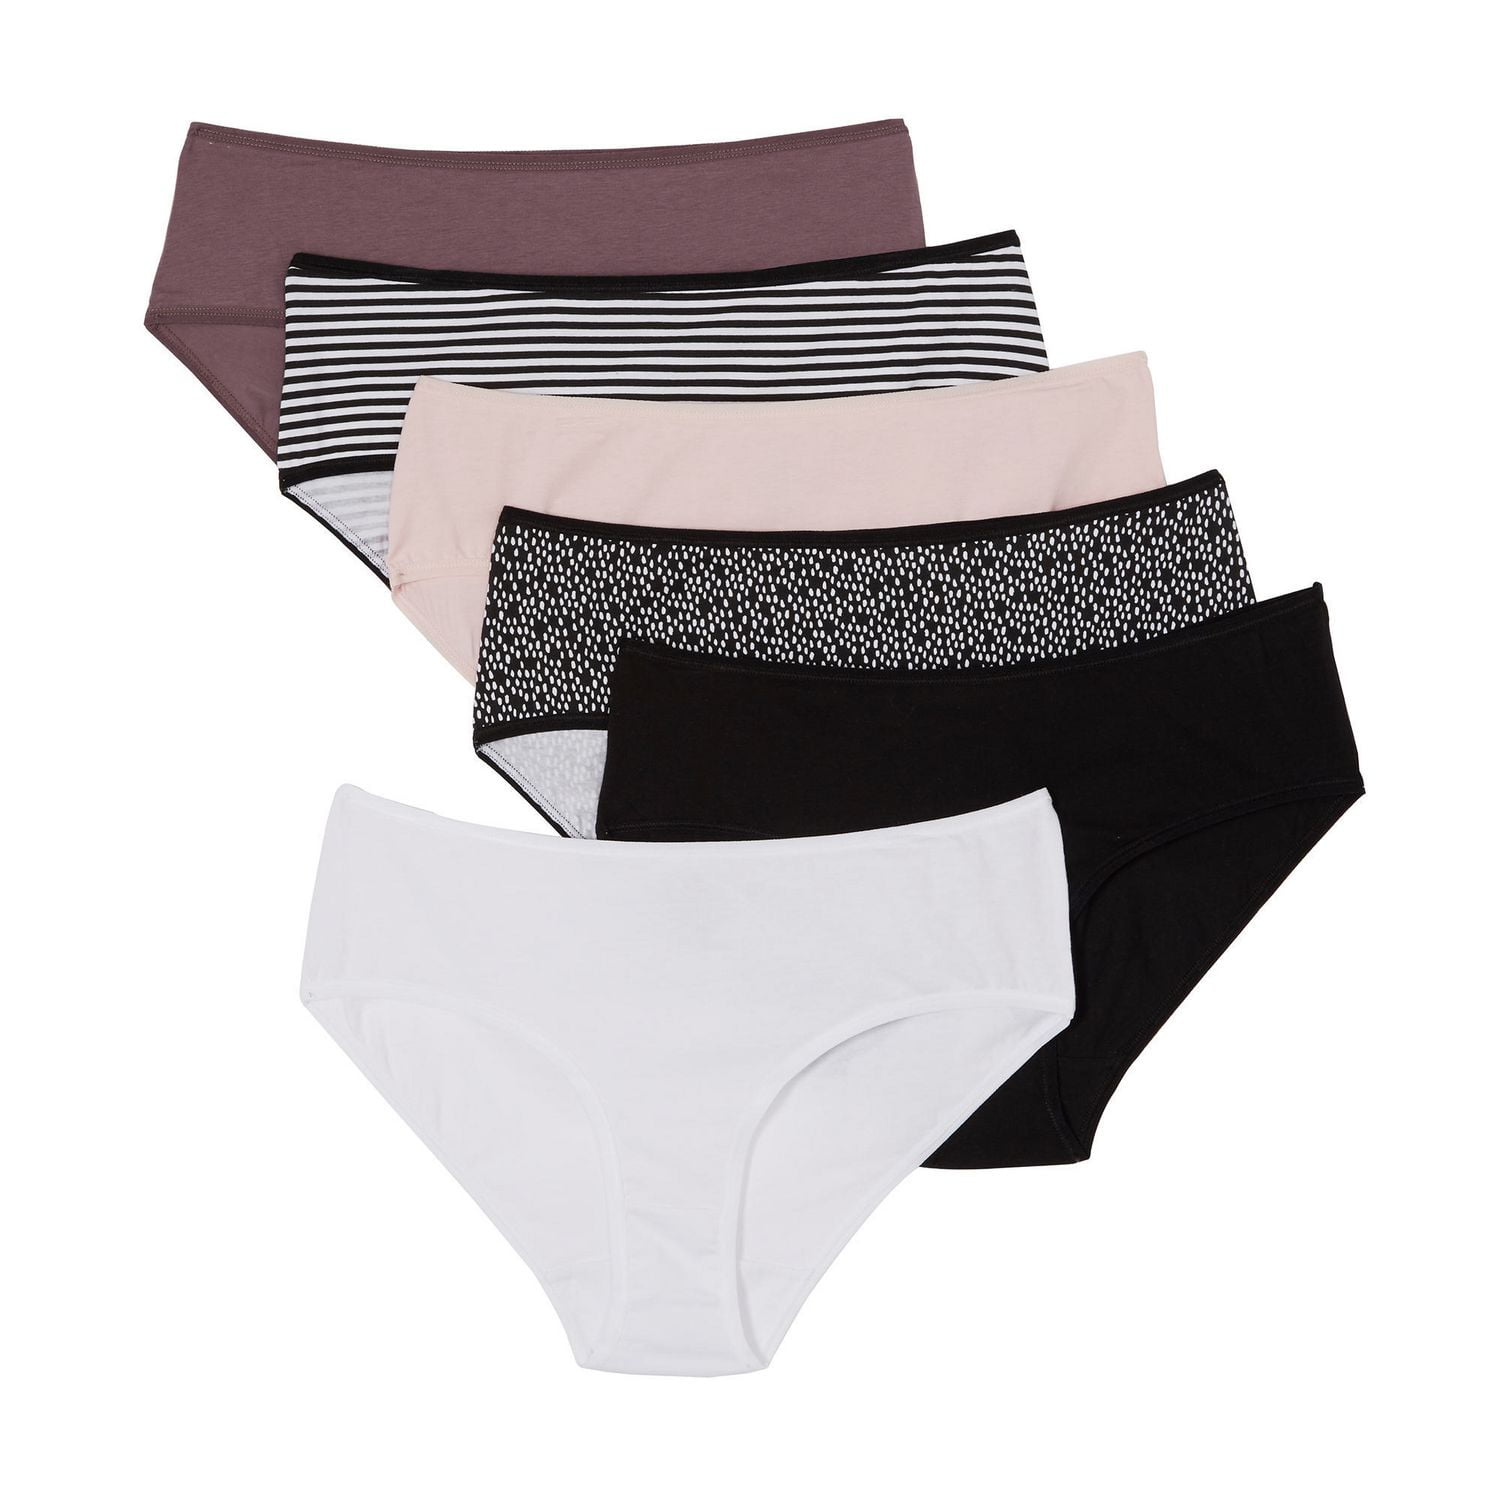 George Women's Hipster Briefs, 6-Pack 